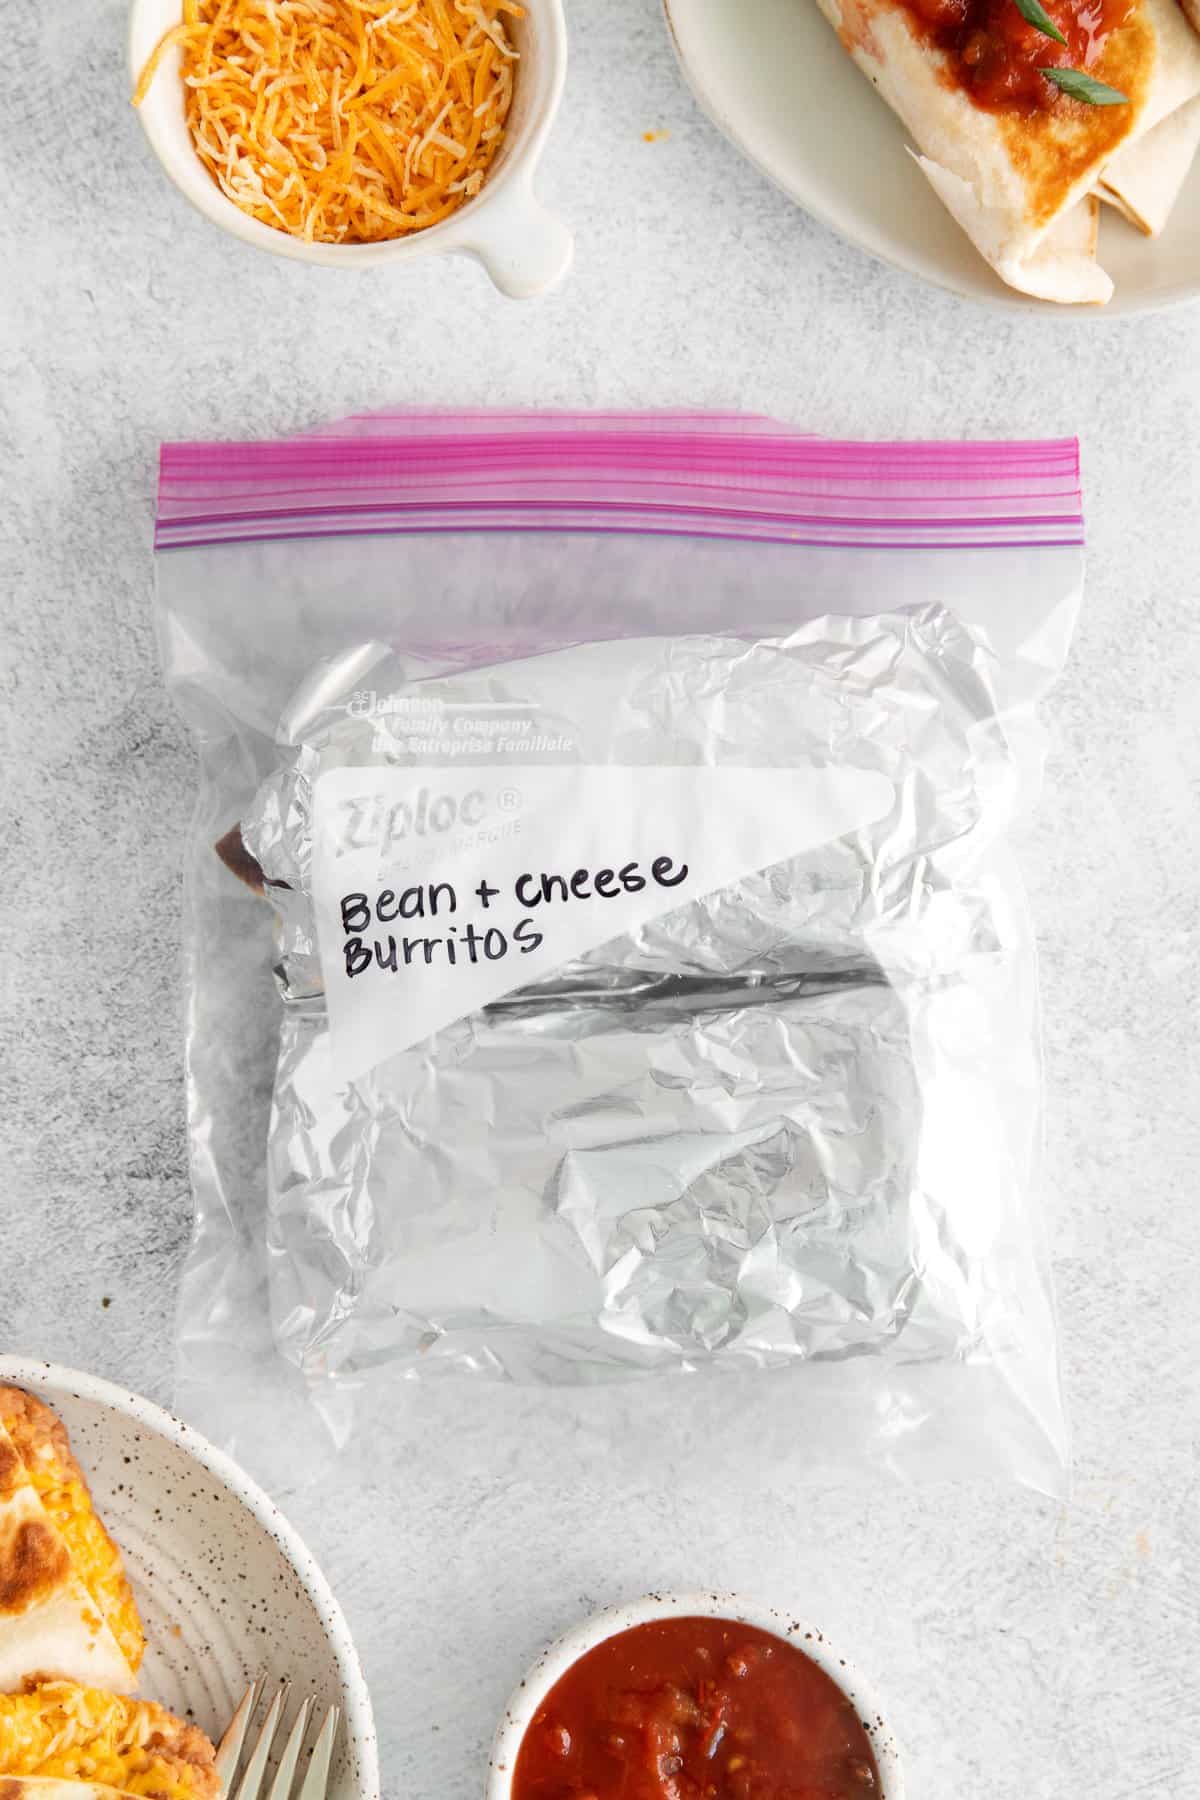 Bean and cheese burritos in a ziploc bag for the freezer.